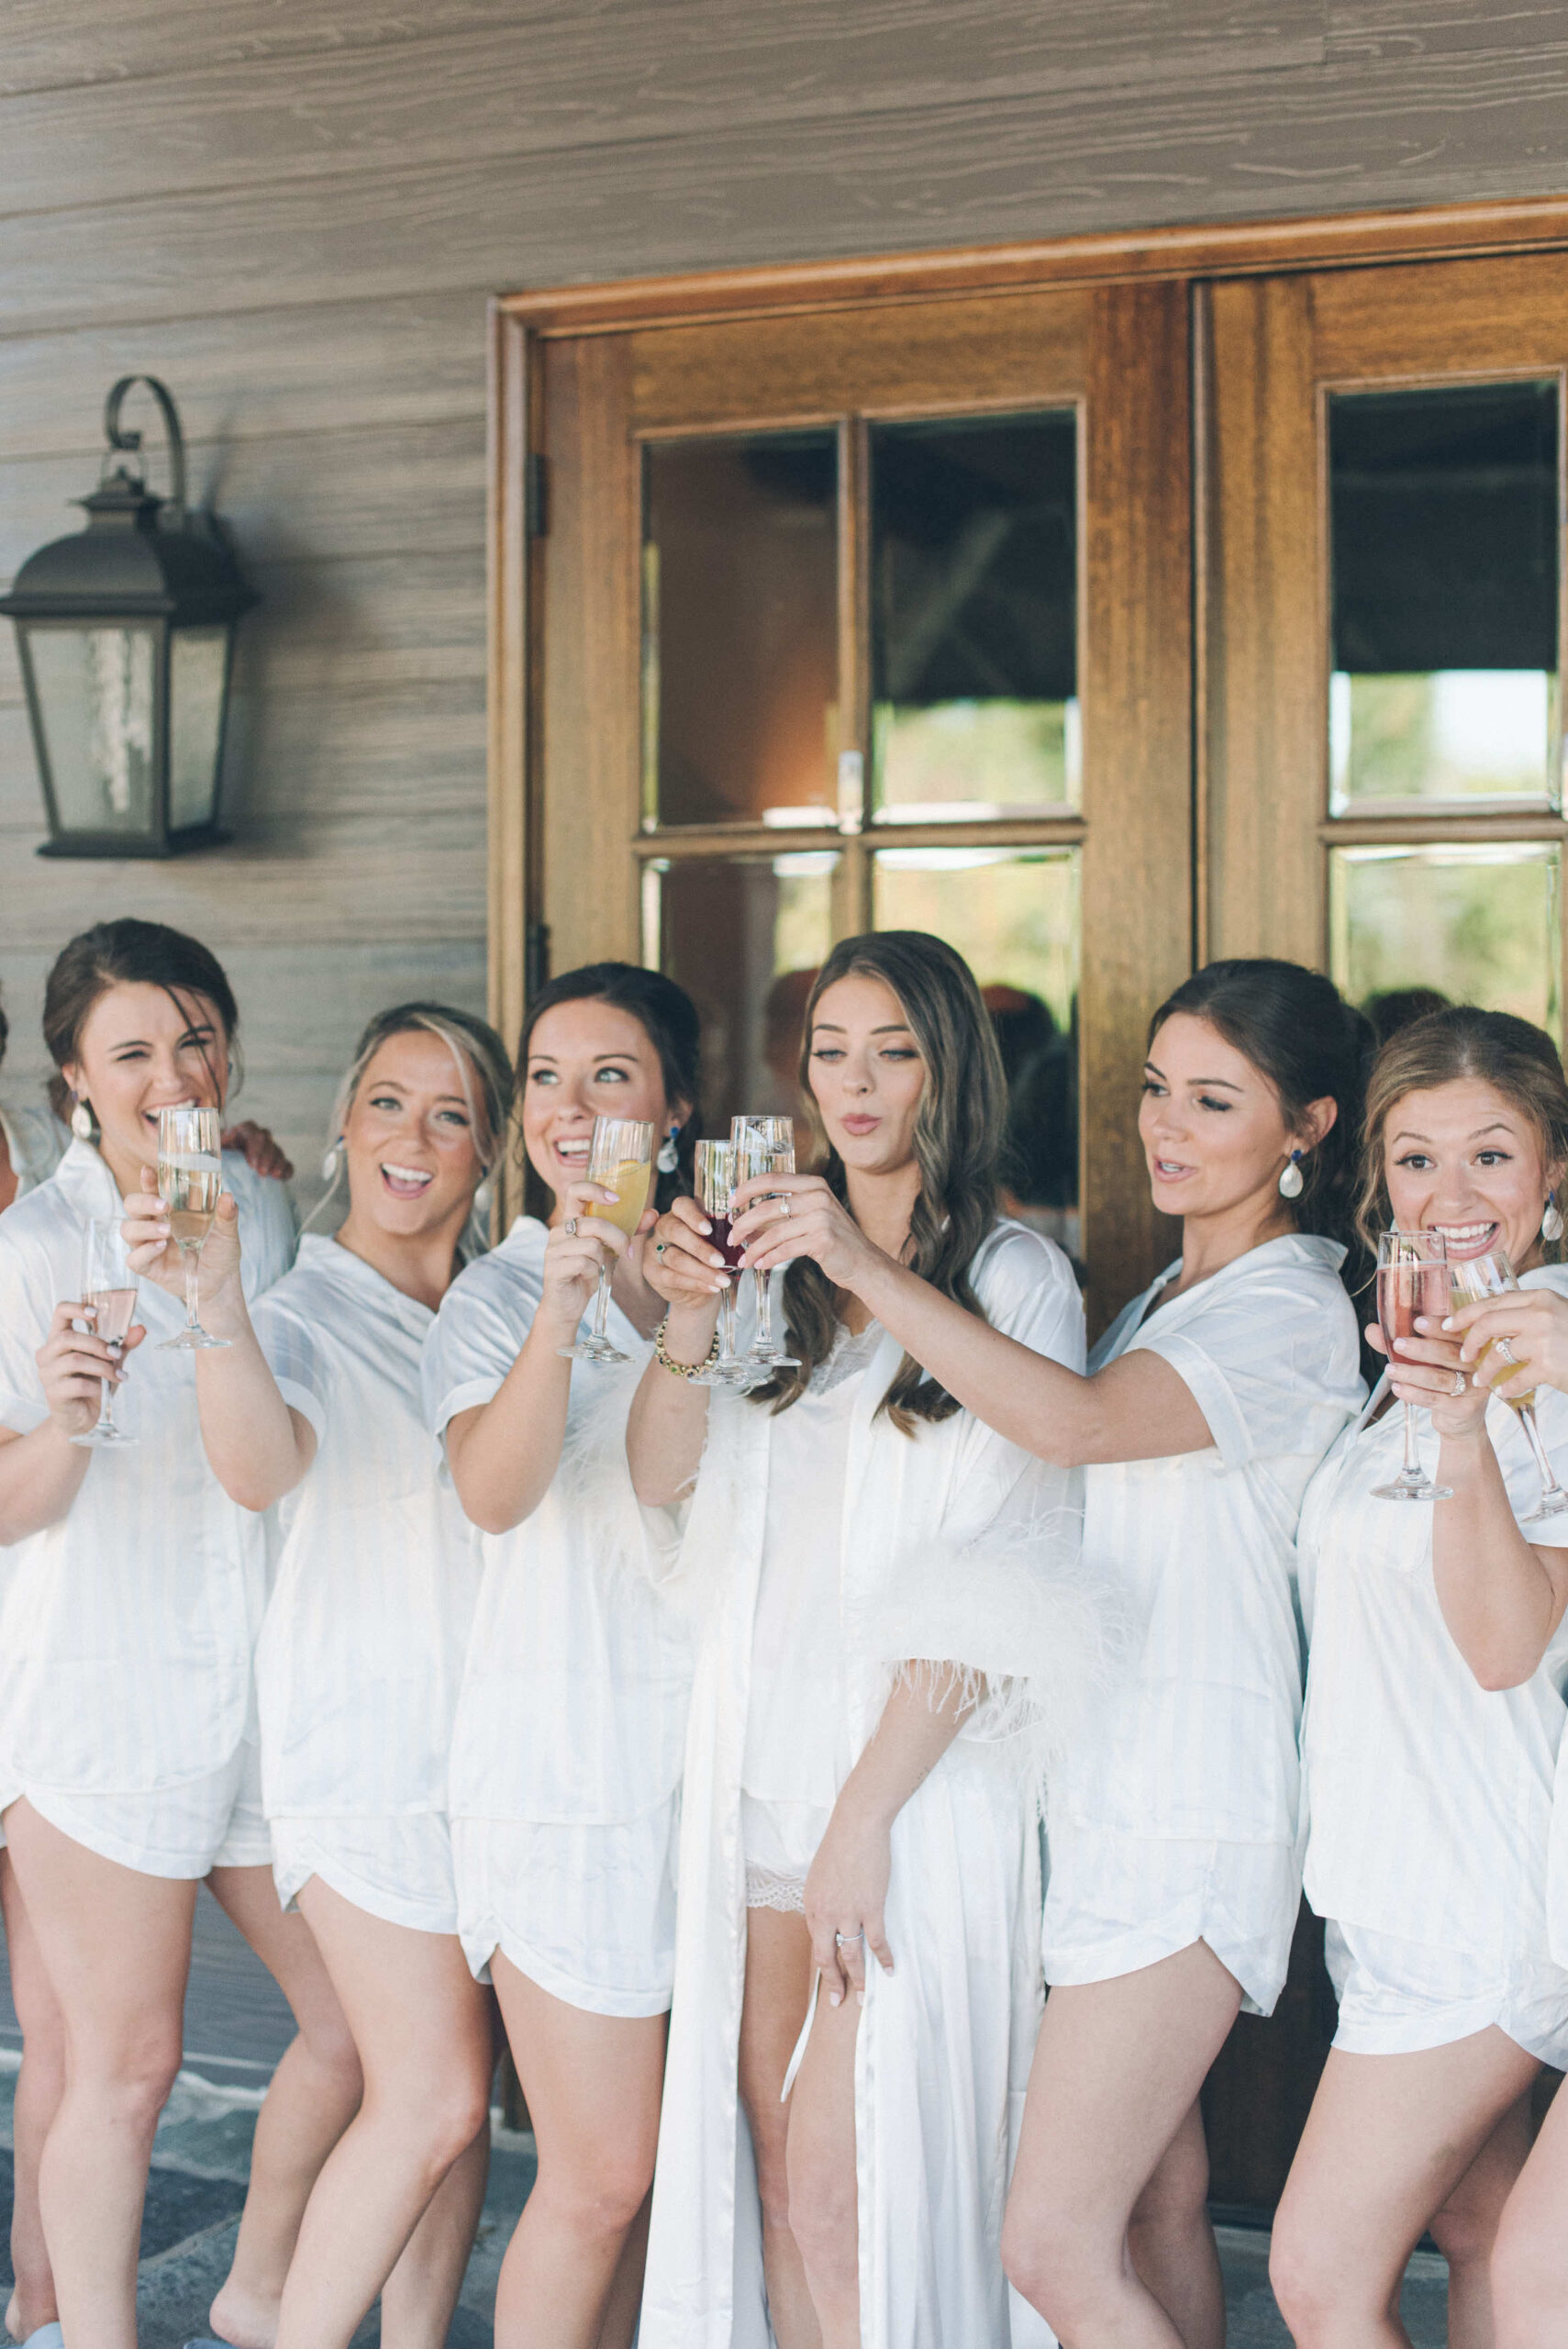 Bridal party at Park Crest Events wedding venue facility toasting with mimosas to celebrate their friend getting married